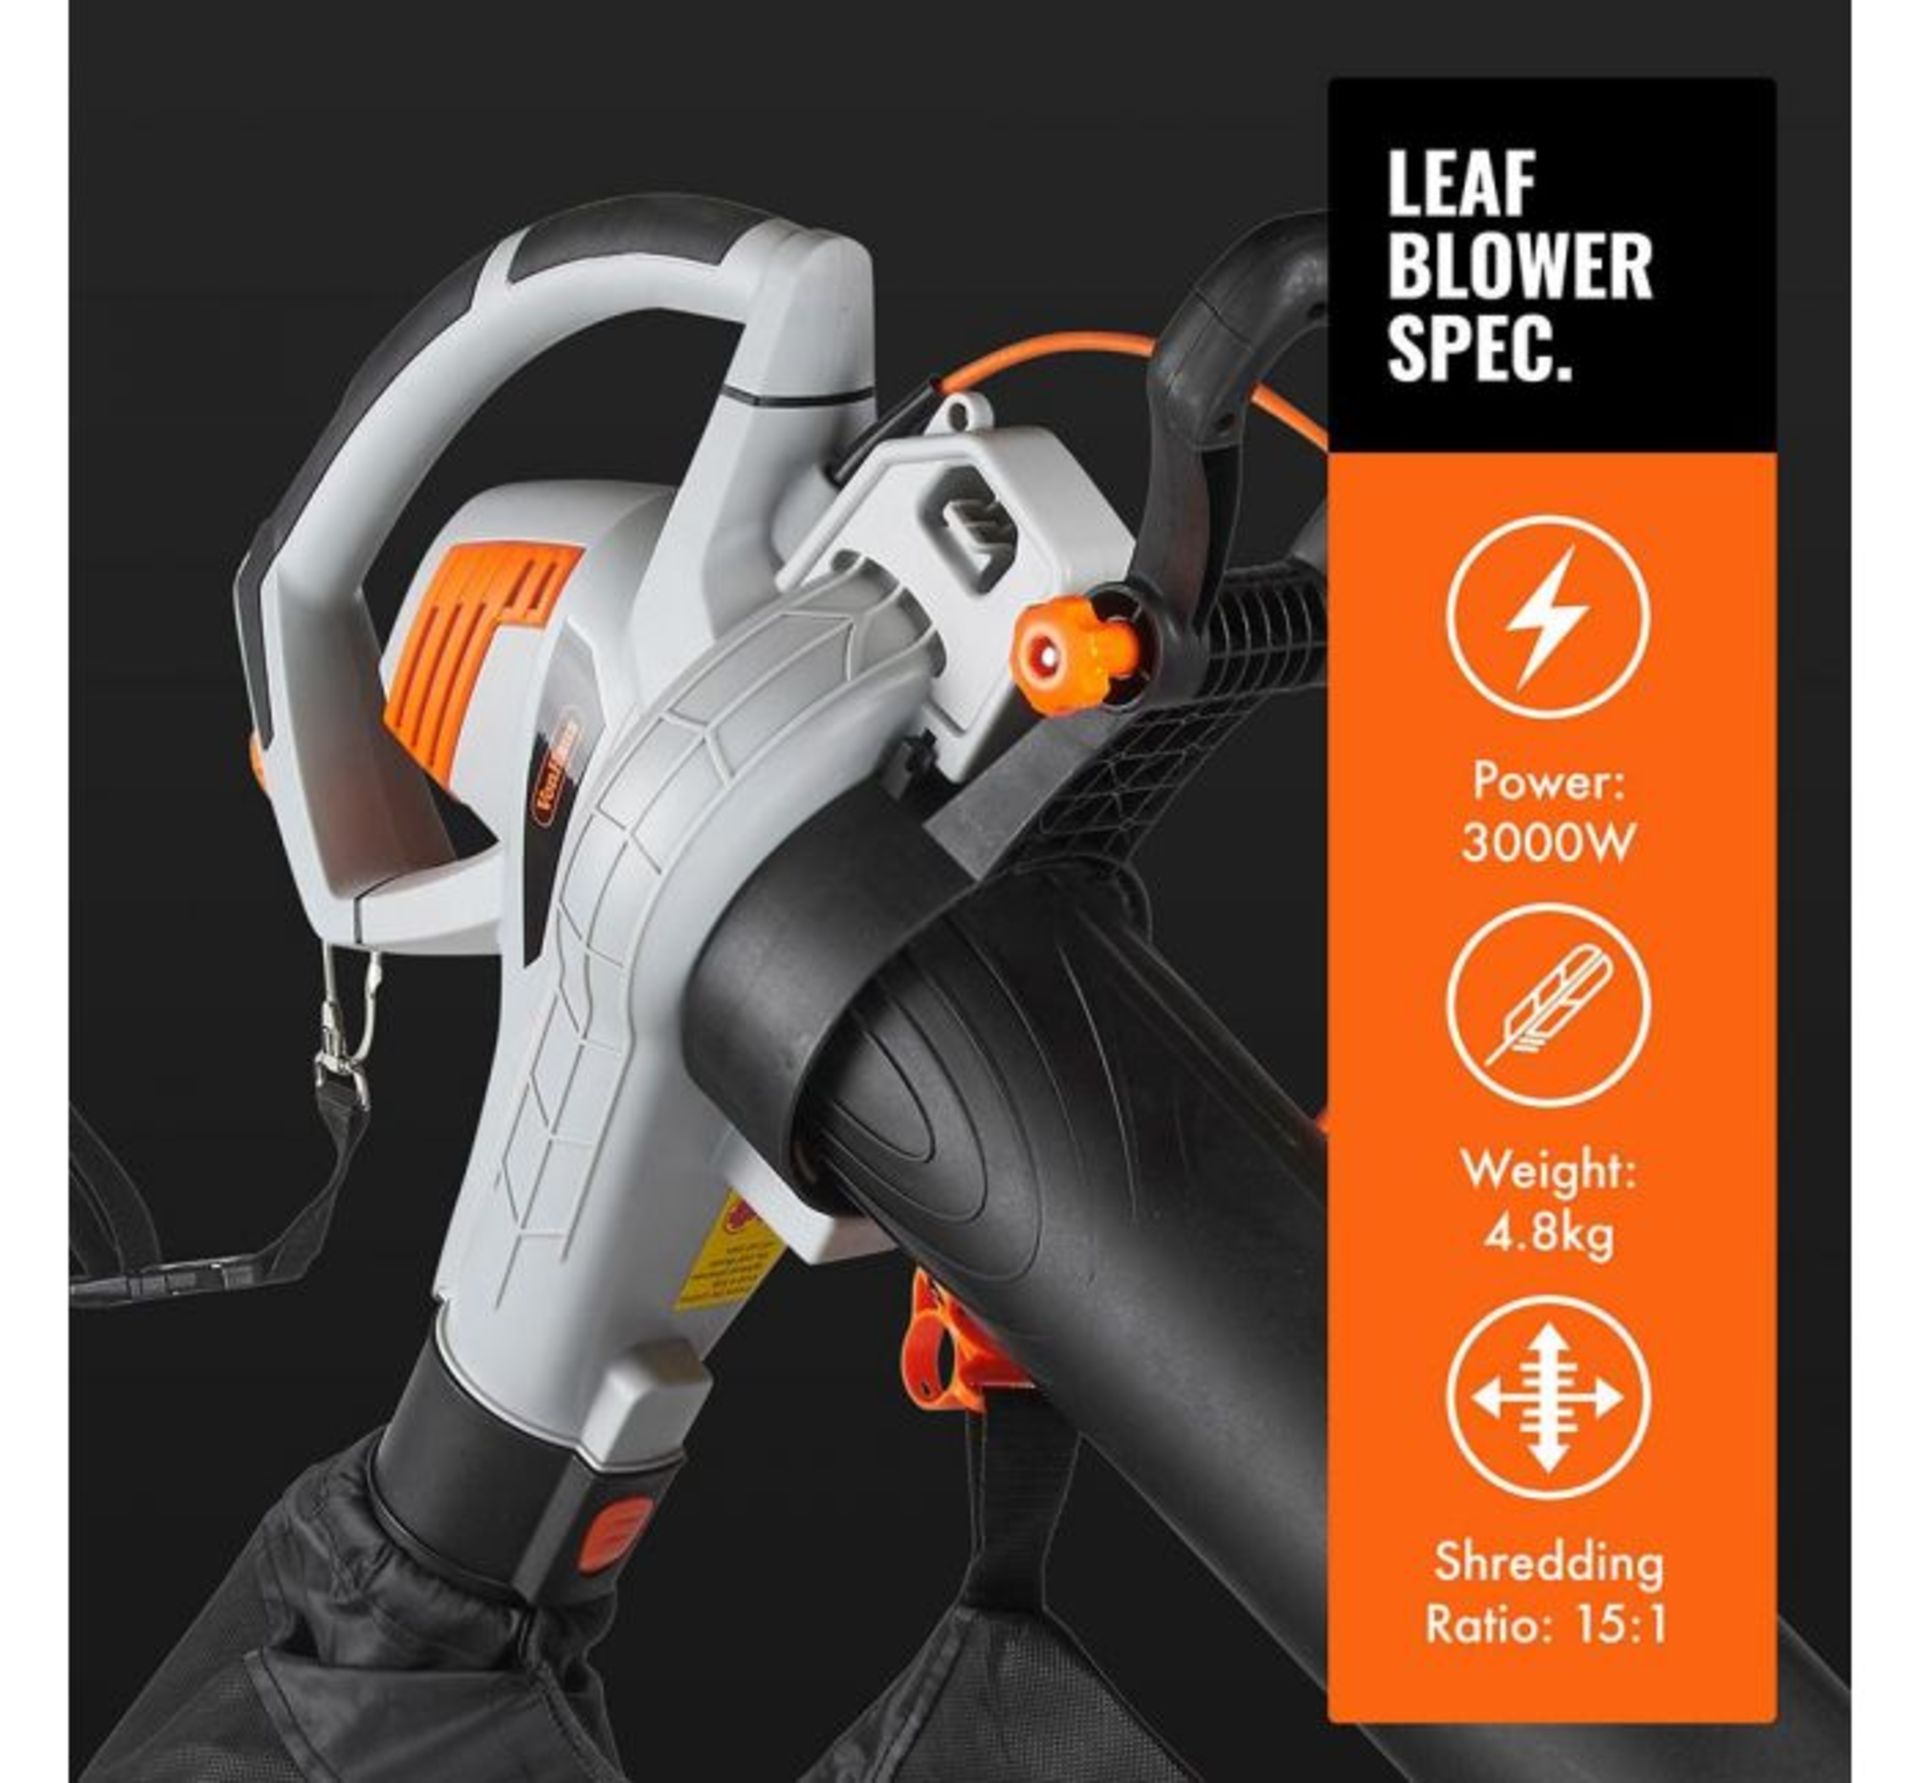 (DD25) 3000W 3-in-1 Leaf Blower Powerful 3000W motor blows, vacuums and mulches leaves into ma... - Image 4 of 4